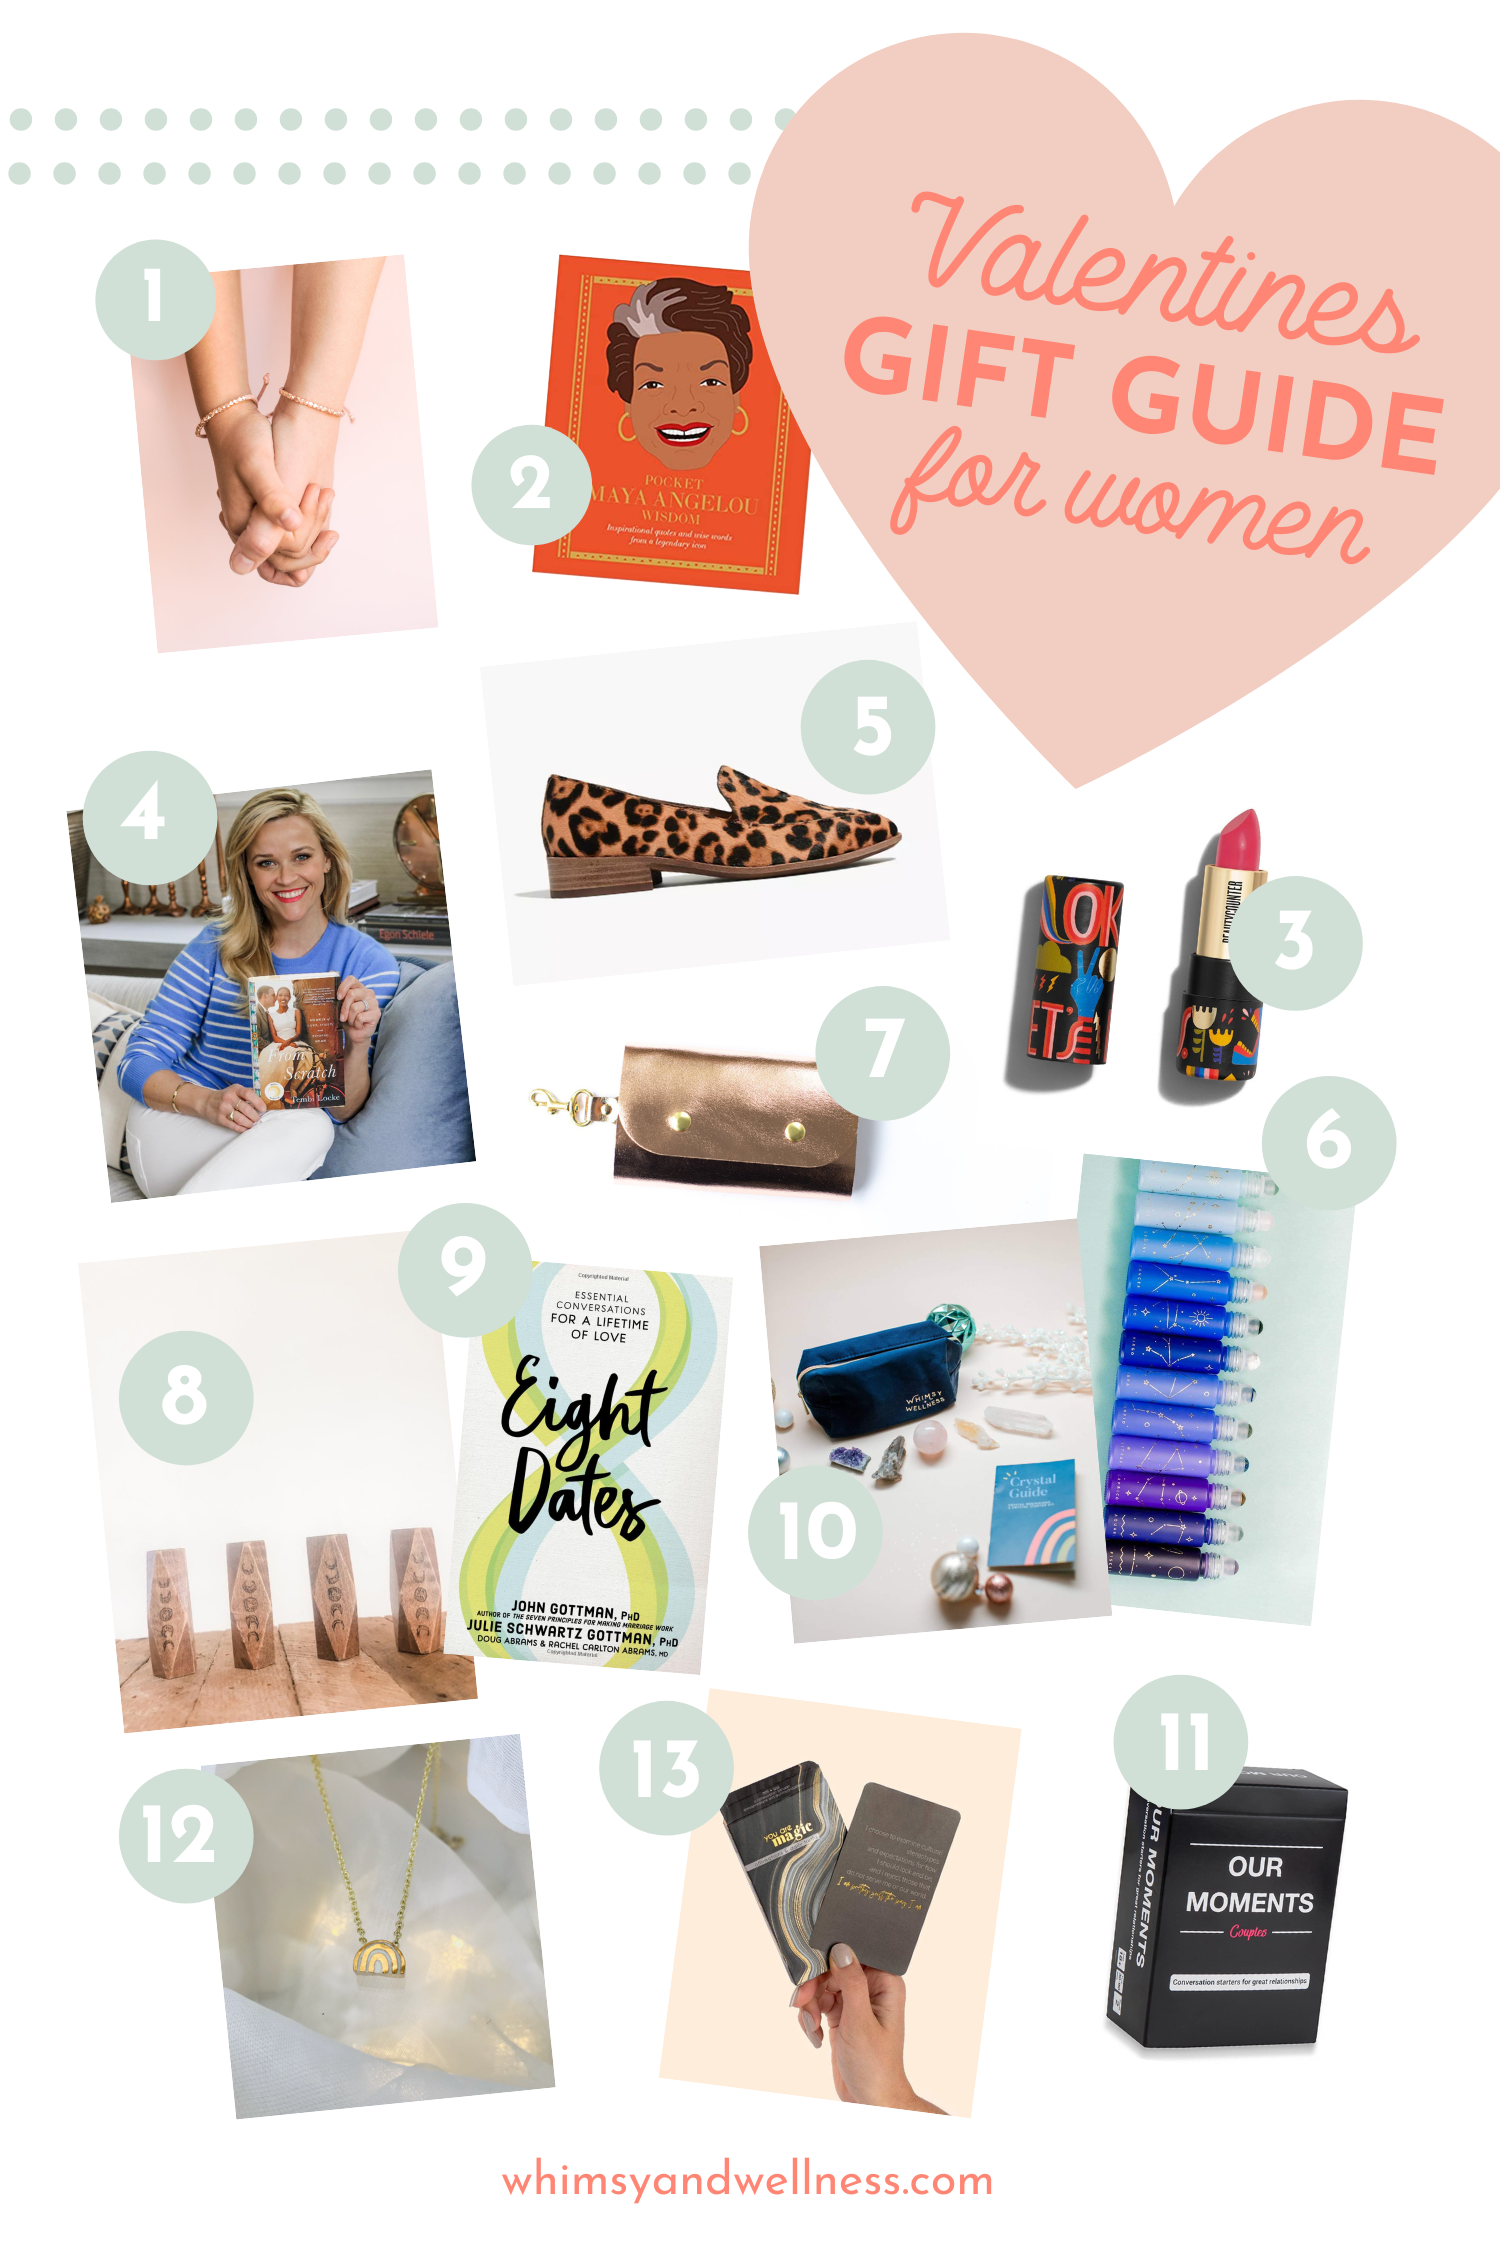 https://blog.whimsyandwellness.com/wp-content/uploads/2020/01/Valentines-Gift-Guide.png